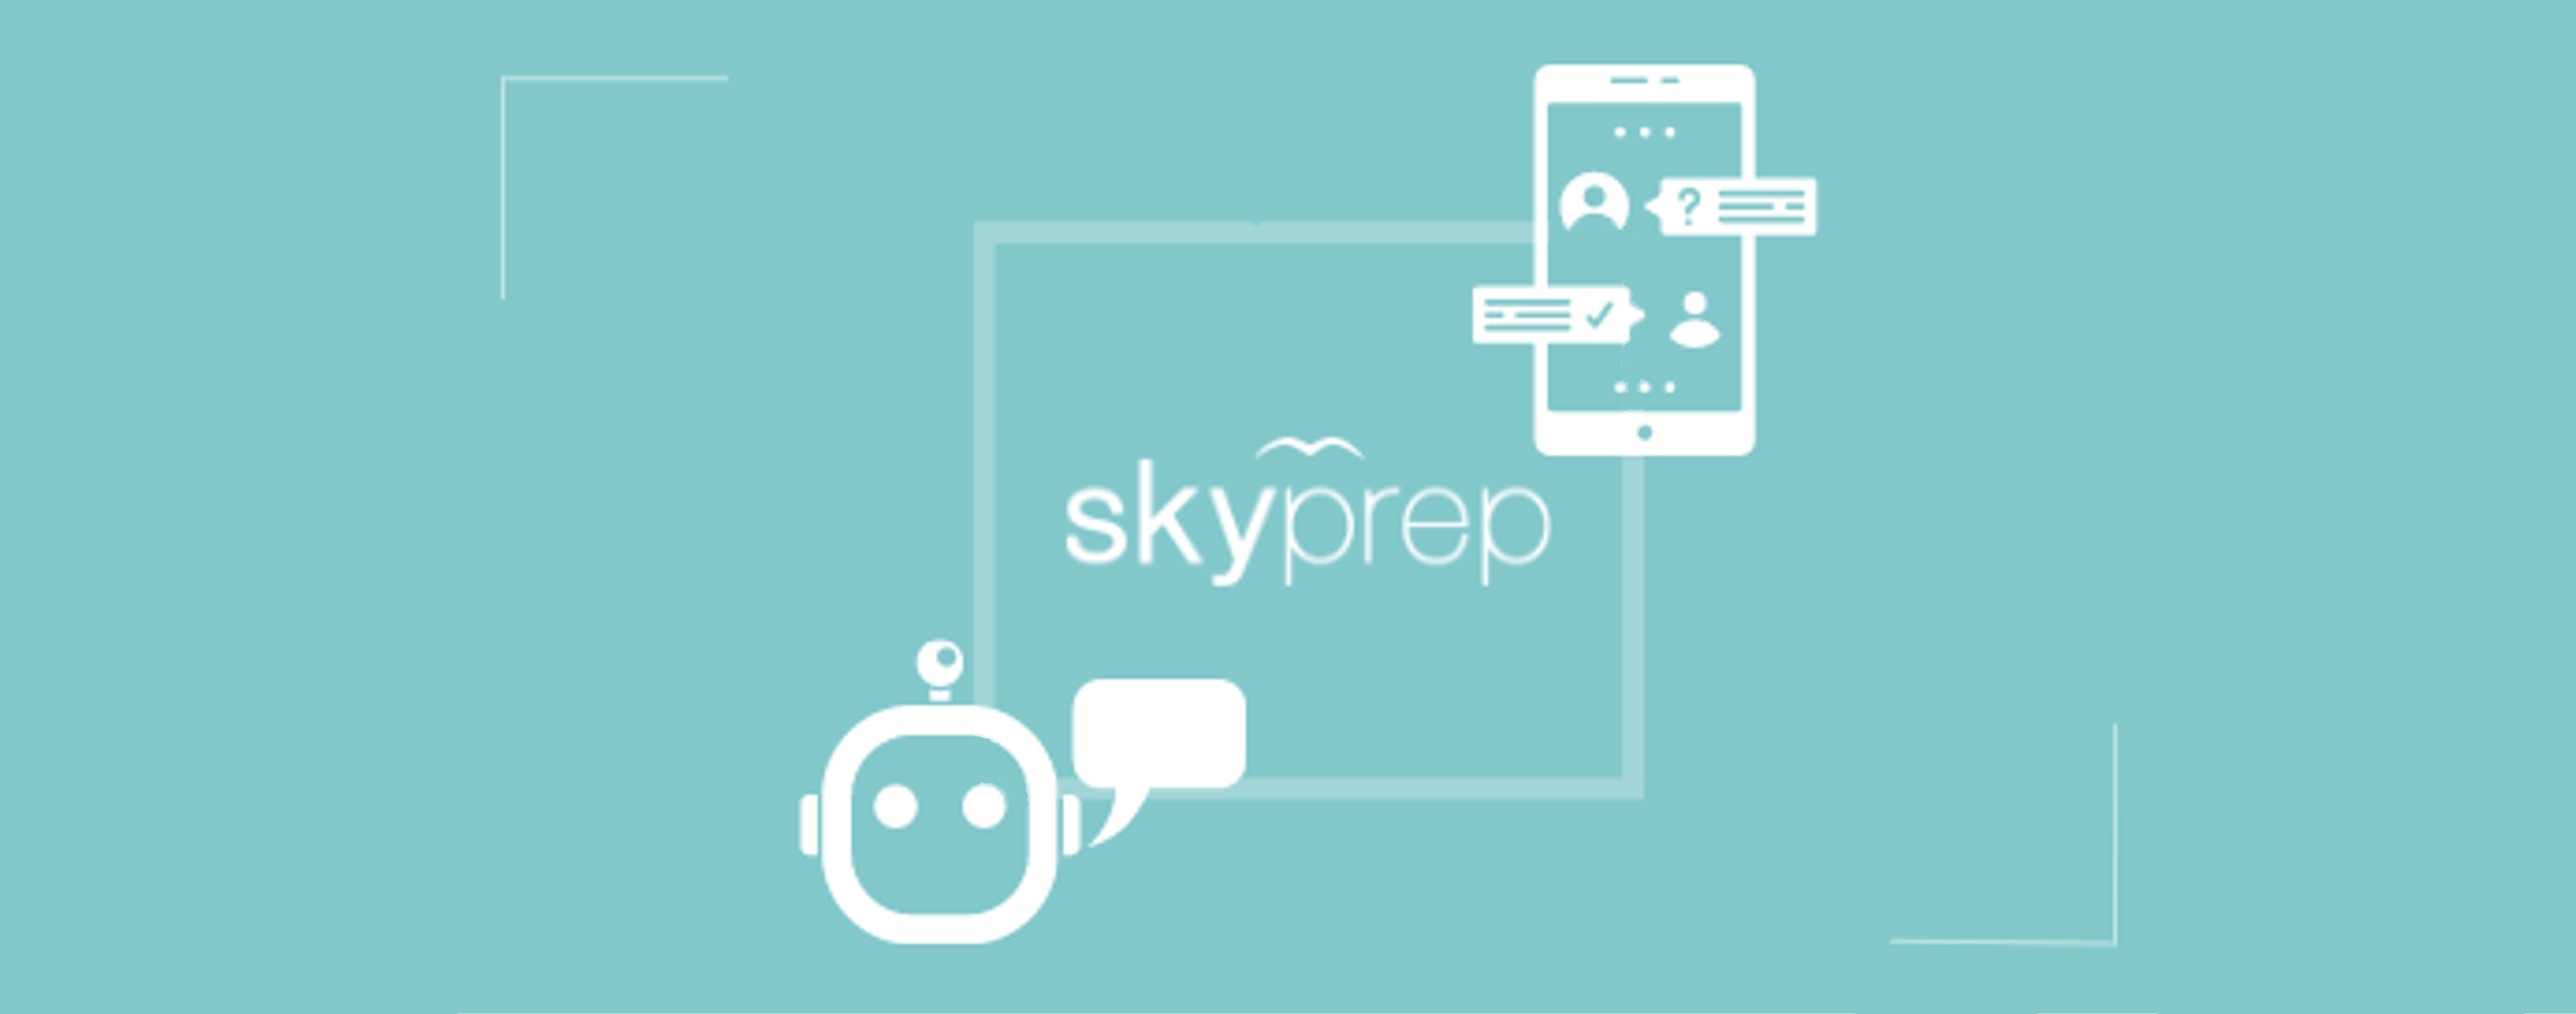 Blog post image pertaining to Personalize Your Learning With SkyPrep’s AI-Like Chatbot